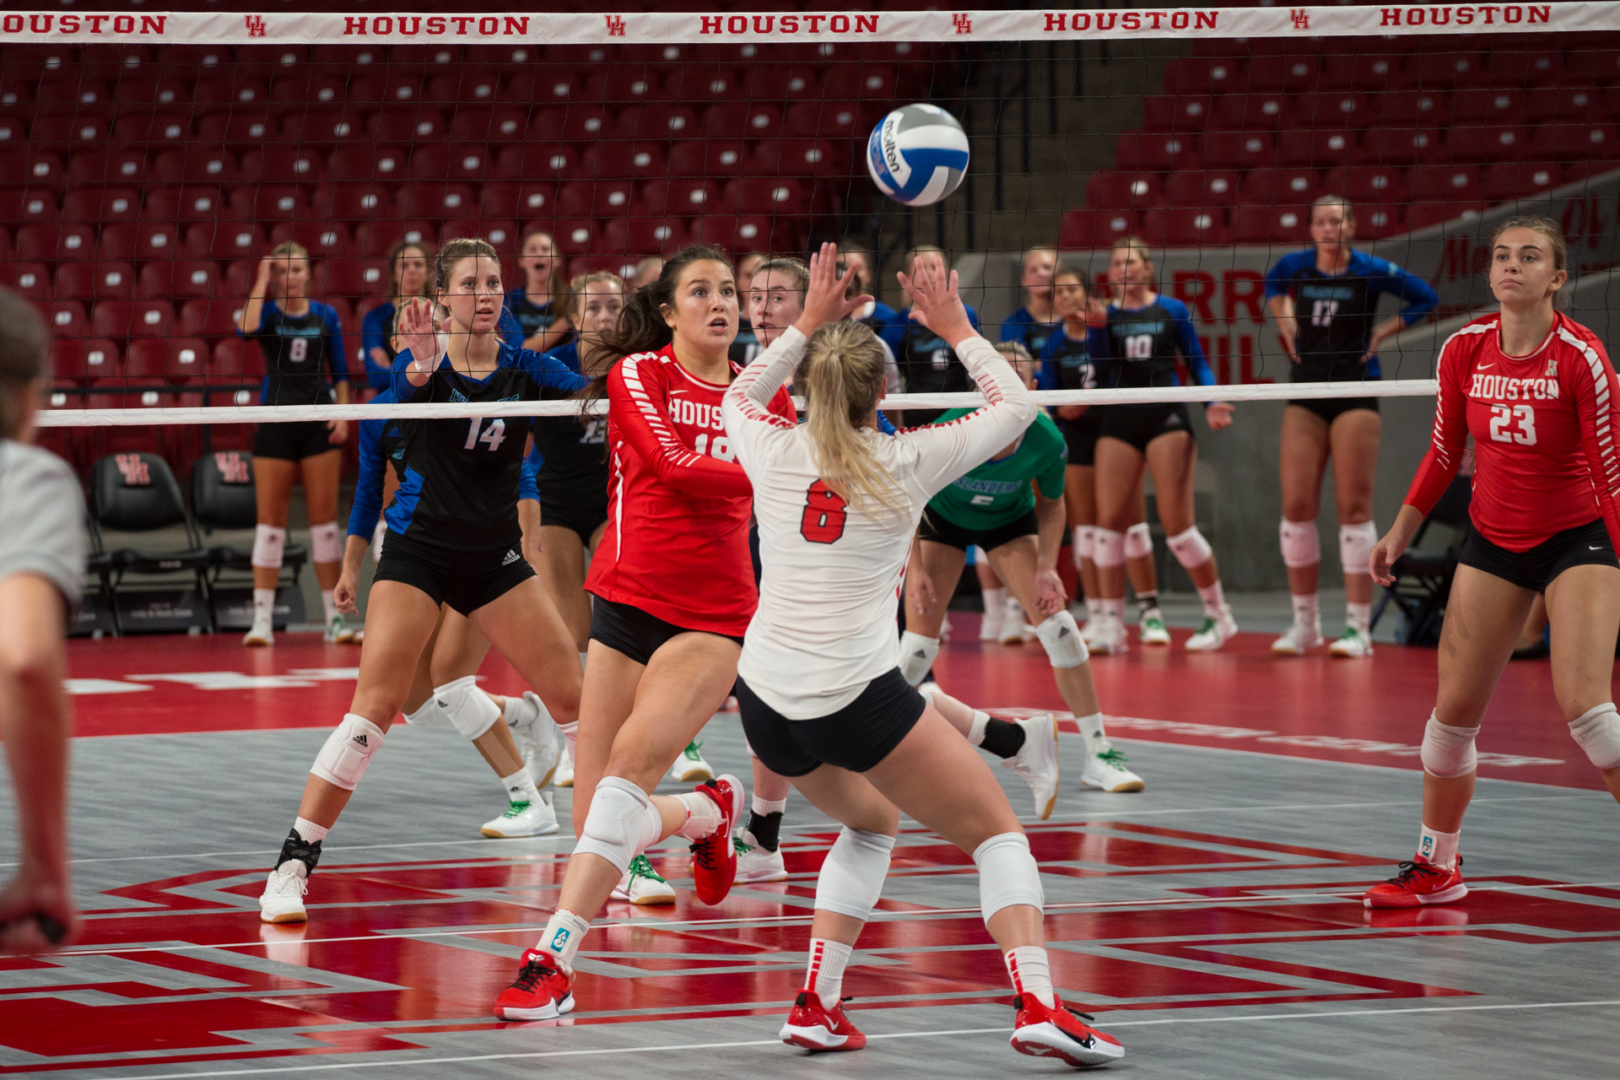 Despite the strong performances during the 2019 season, Houston's volleyball team had a rocky beginning to the year as it opened up the campaign on a four-game losing streak before turning the tides. | Trevor Nolley/The Cougar